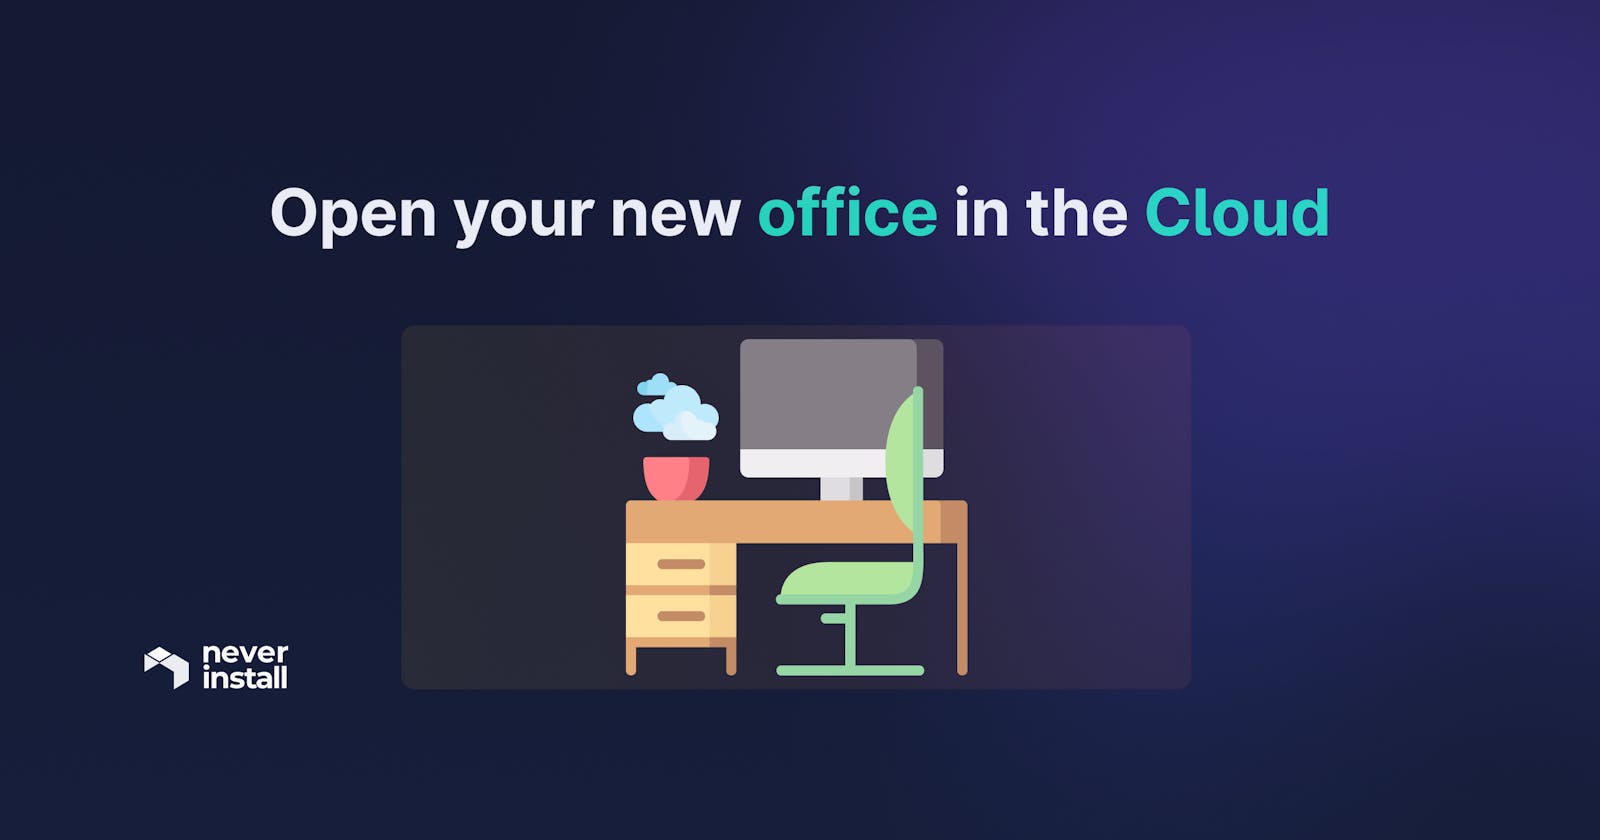 Open your new office in the Cloud